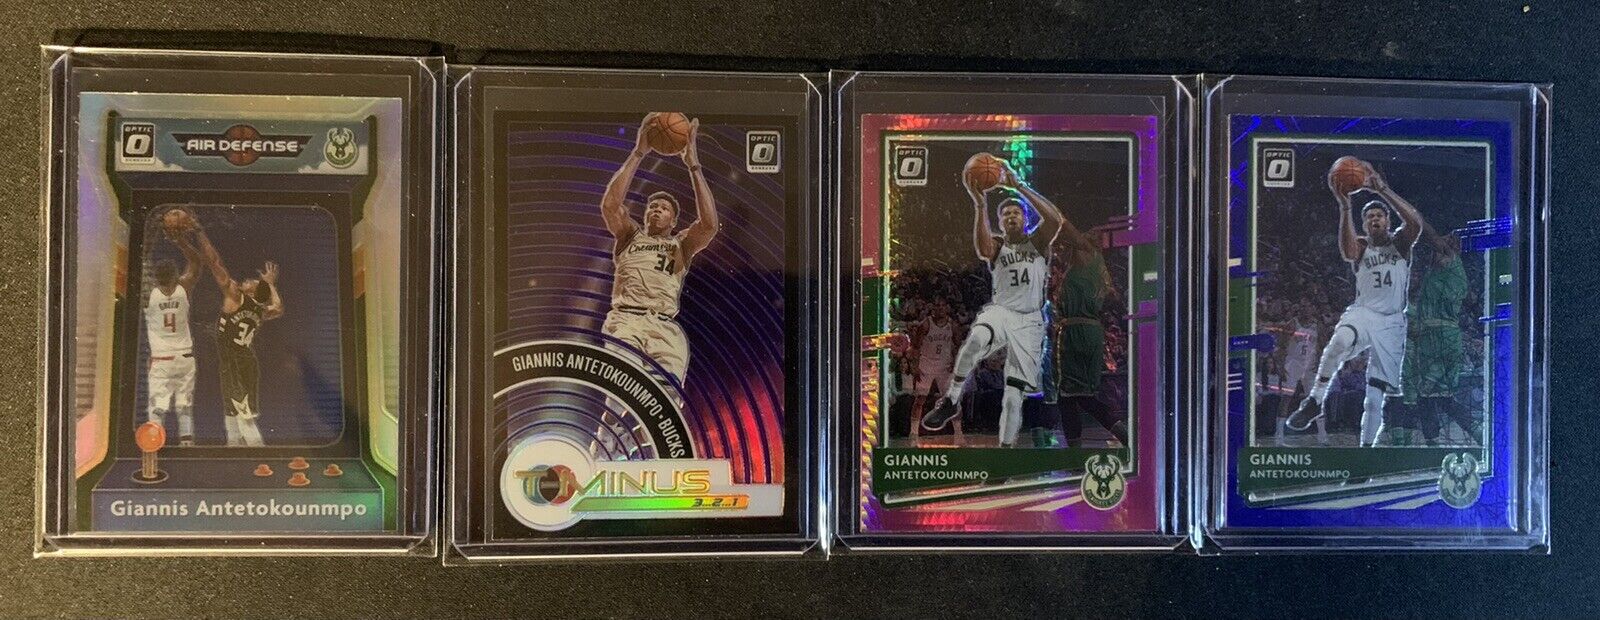 Giannis Antetokounmpo 2020-21 Optic Color (4) card lot Got To Love COLOR